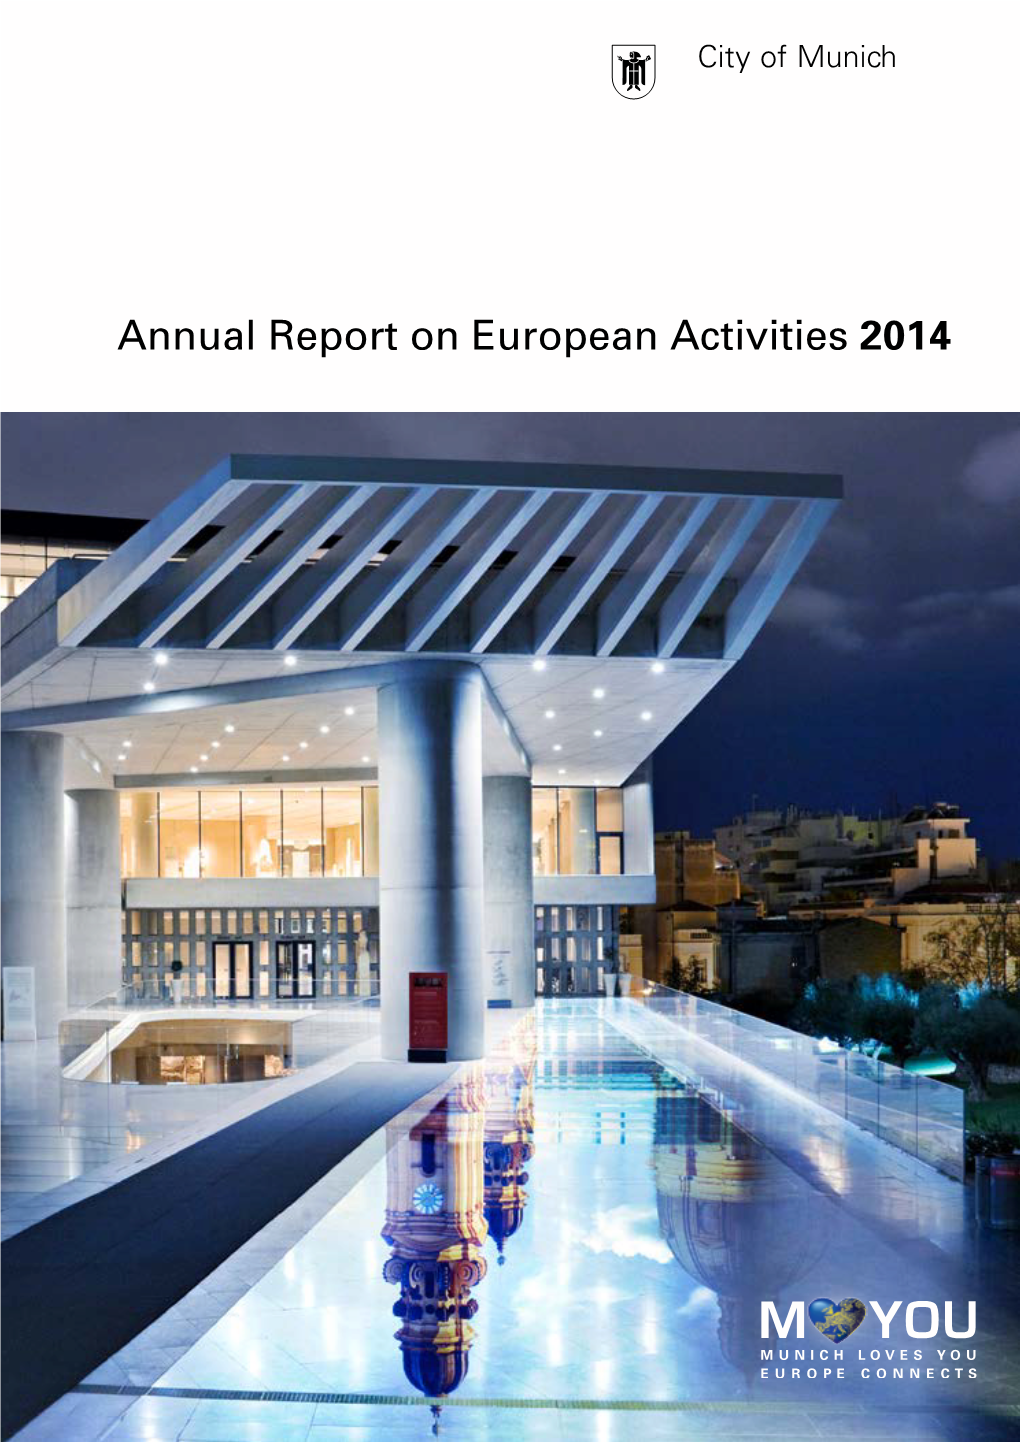 Annual Report on European Activities 2014 Munich and Europe Munich‘S Role in Europe 3